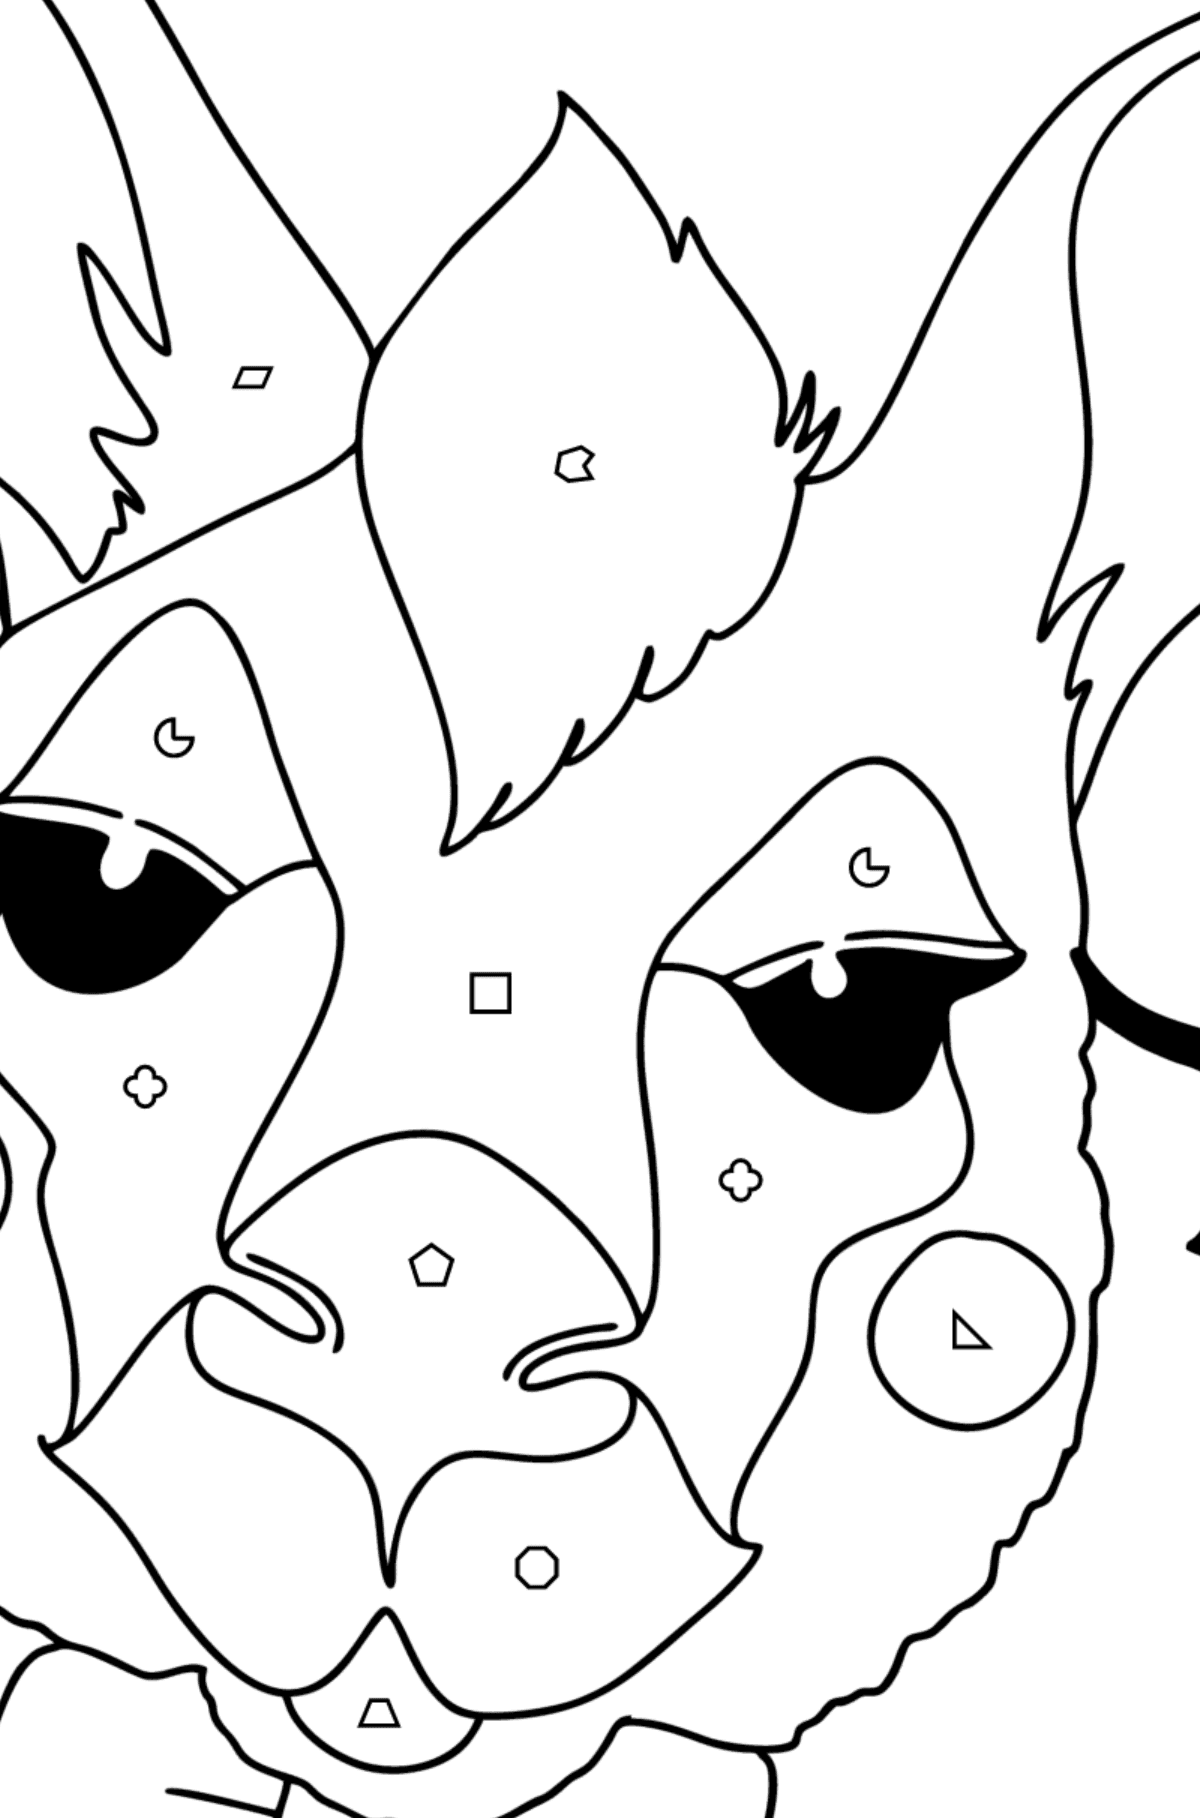 Kangaroo Mask coloring page - Coloring by Geometric Shapes for Kids